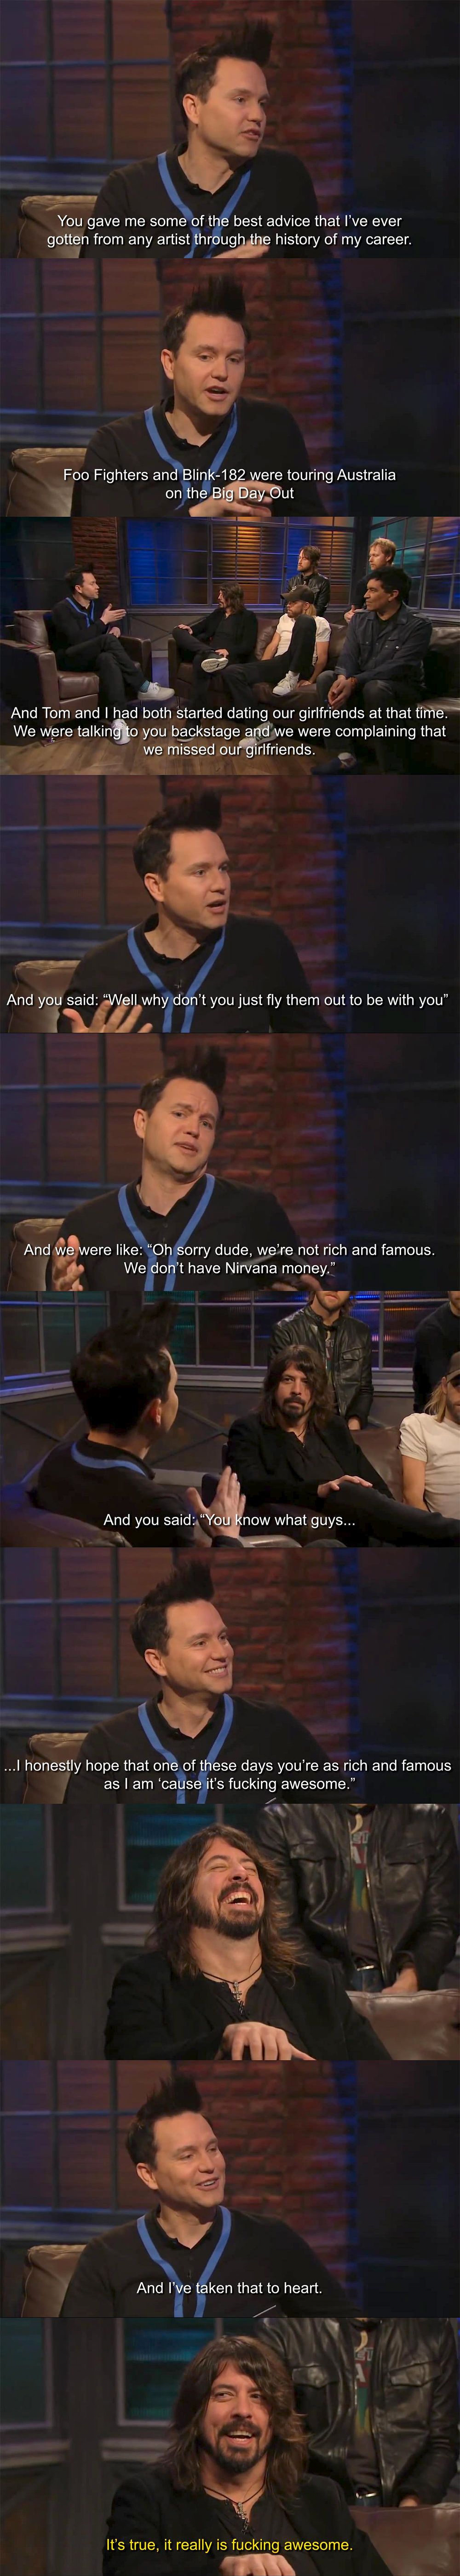 Life lesson from Dave Grohl